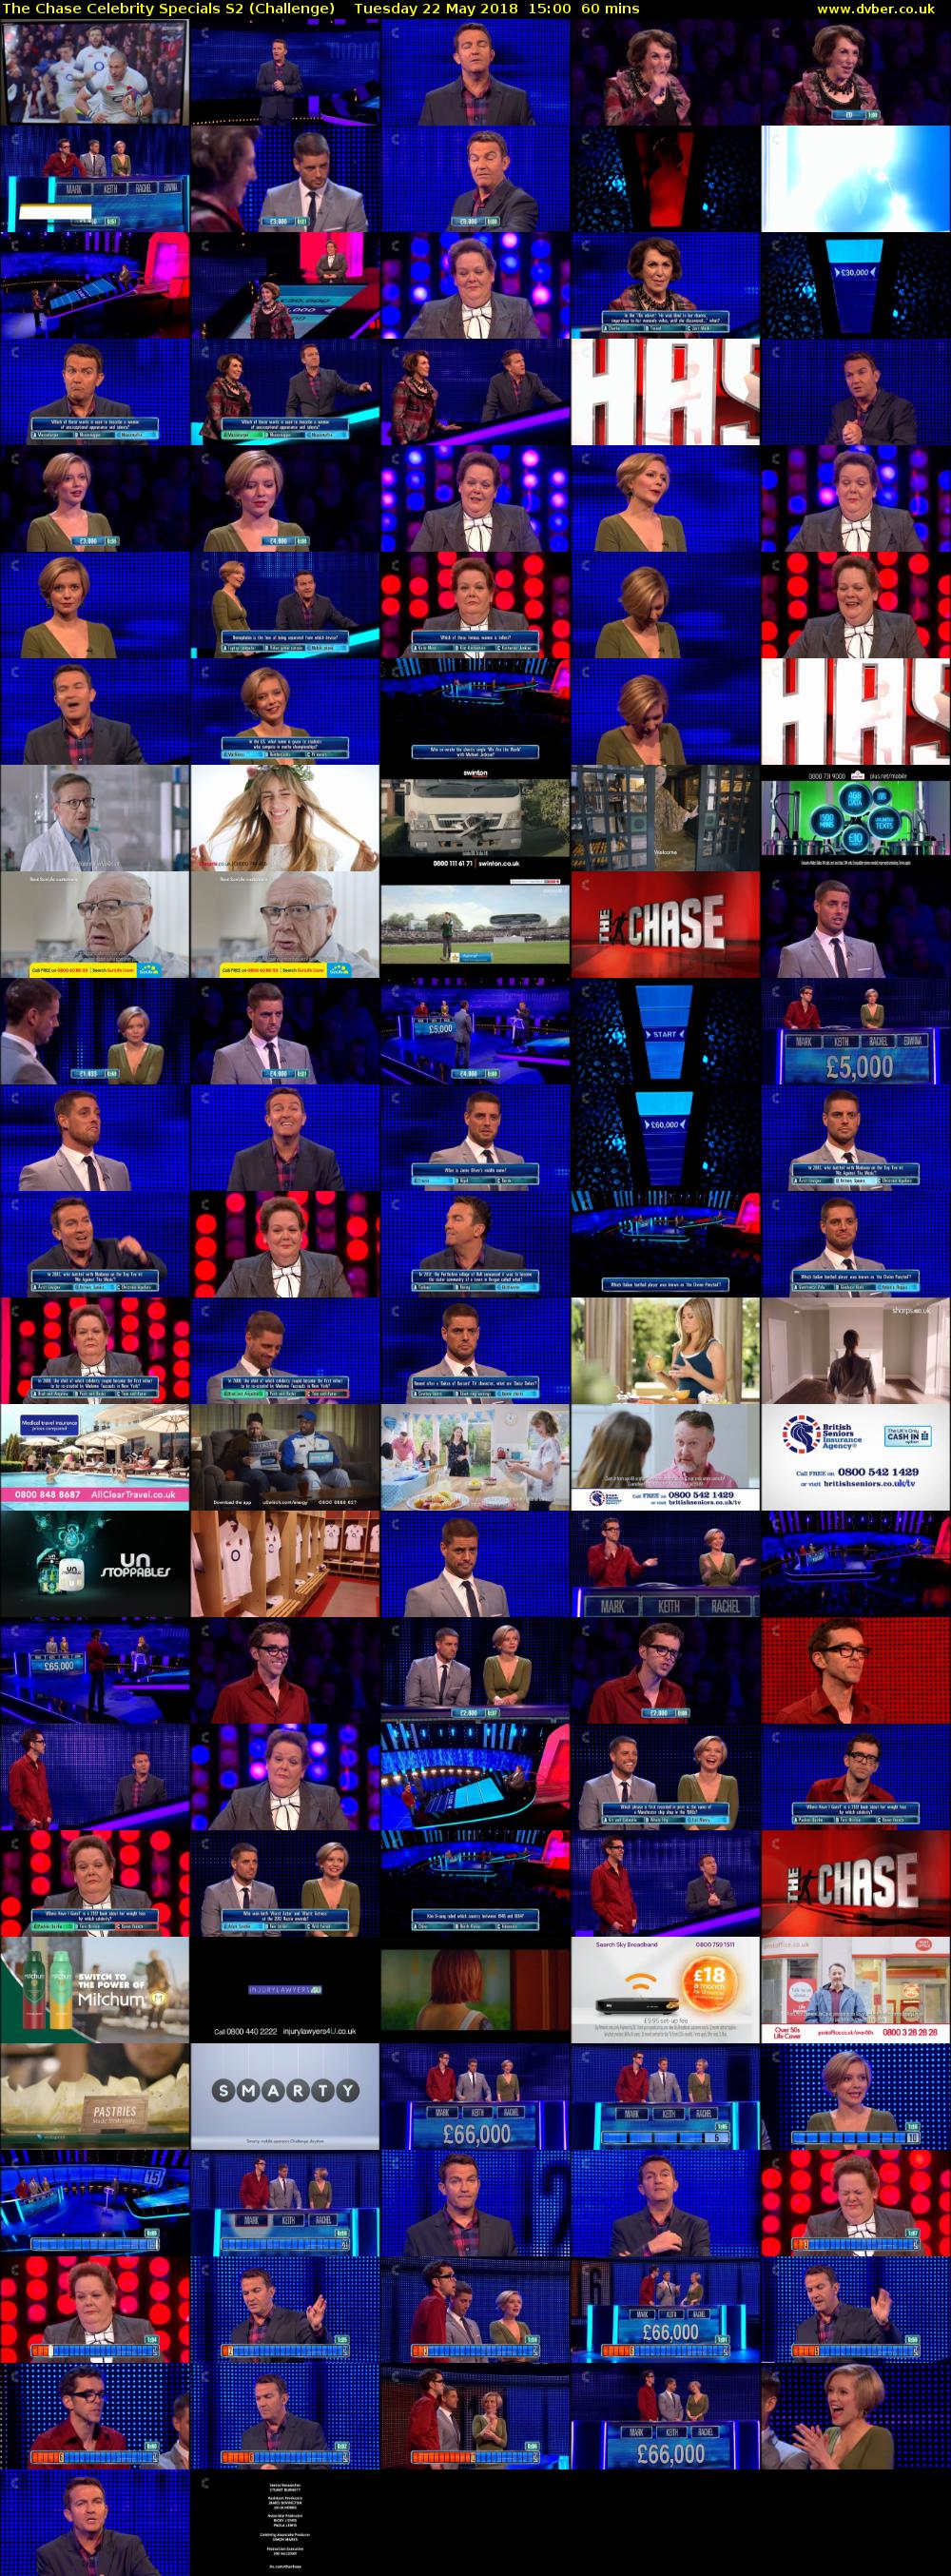 The Chase Celebrity Specials S2 (Challenge) Tuesday 22 May 2018 15:00 - 16:00